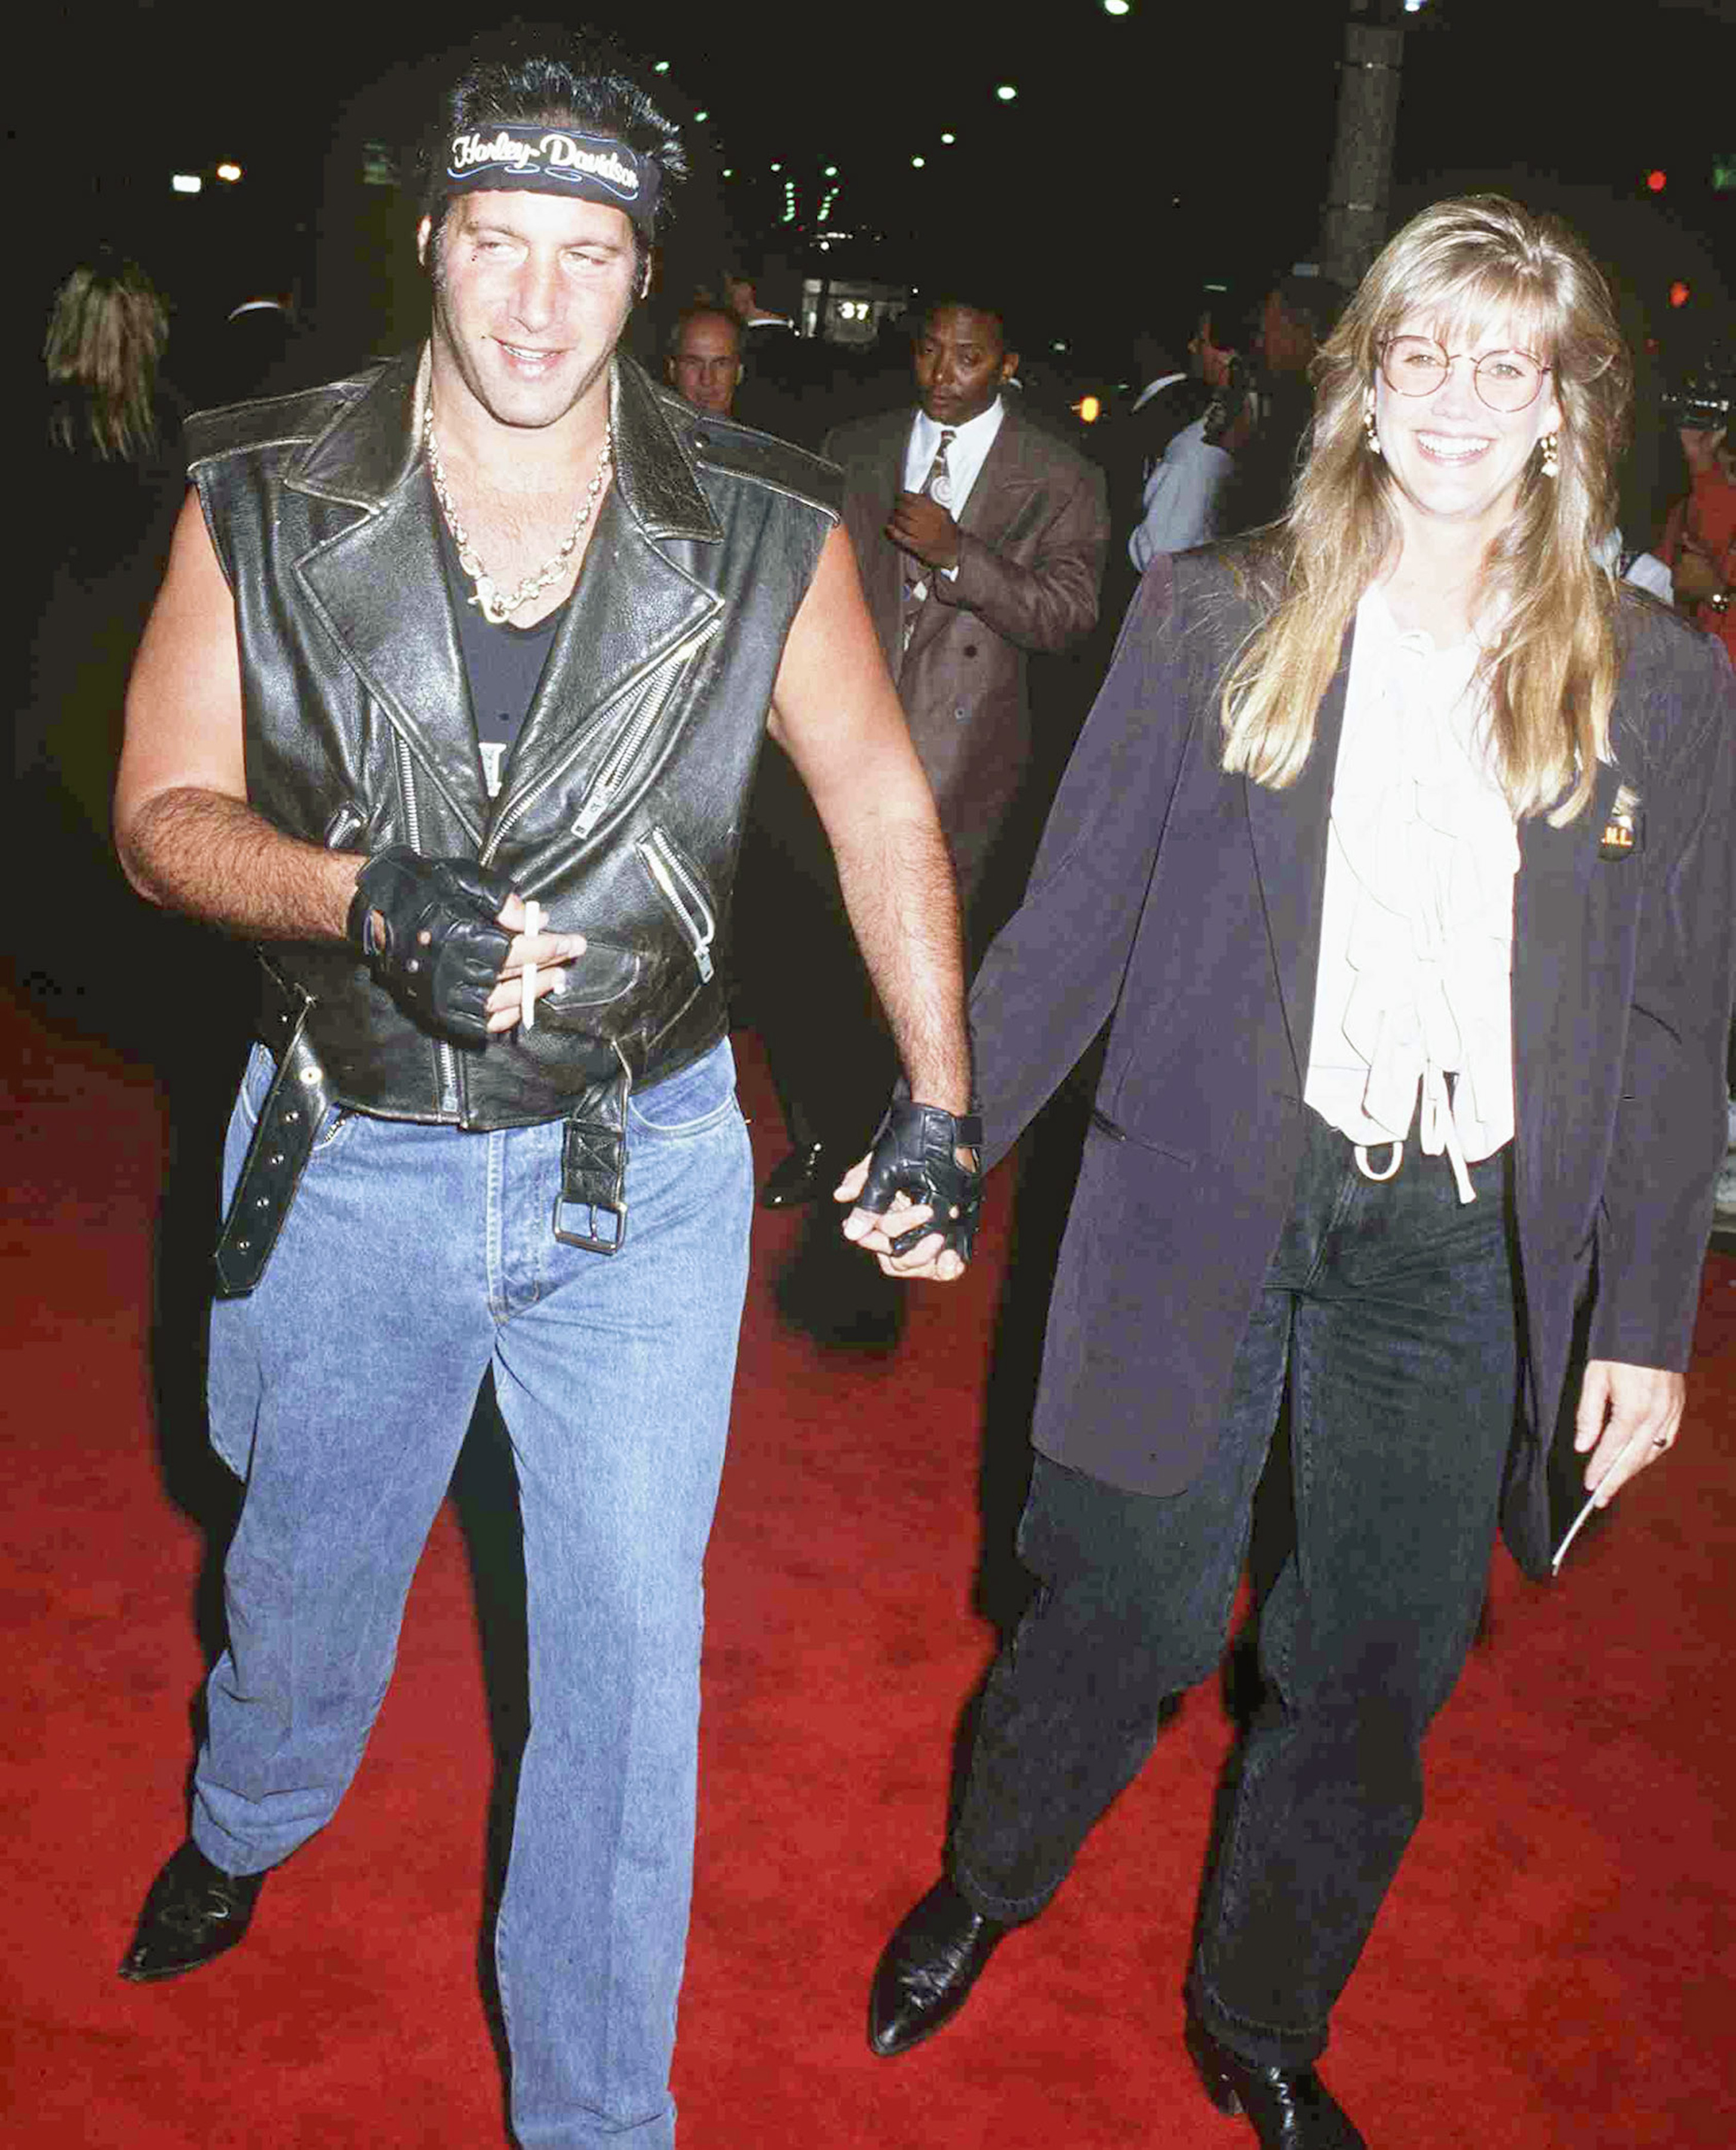 Andrew Dice Clay and Kathleen Monica at the premiere of "Under Siege" in Westwood, California, on October 8, 2000. | Source: Getty Images